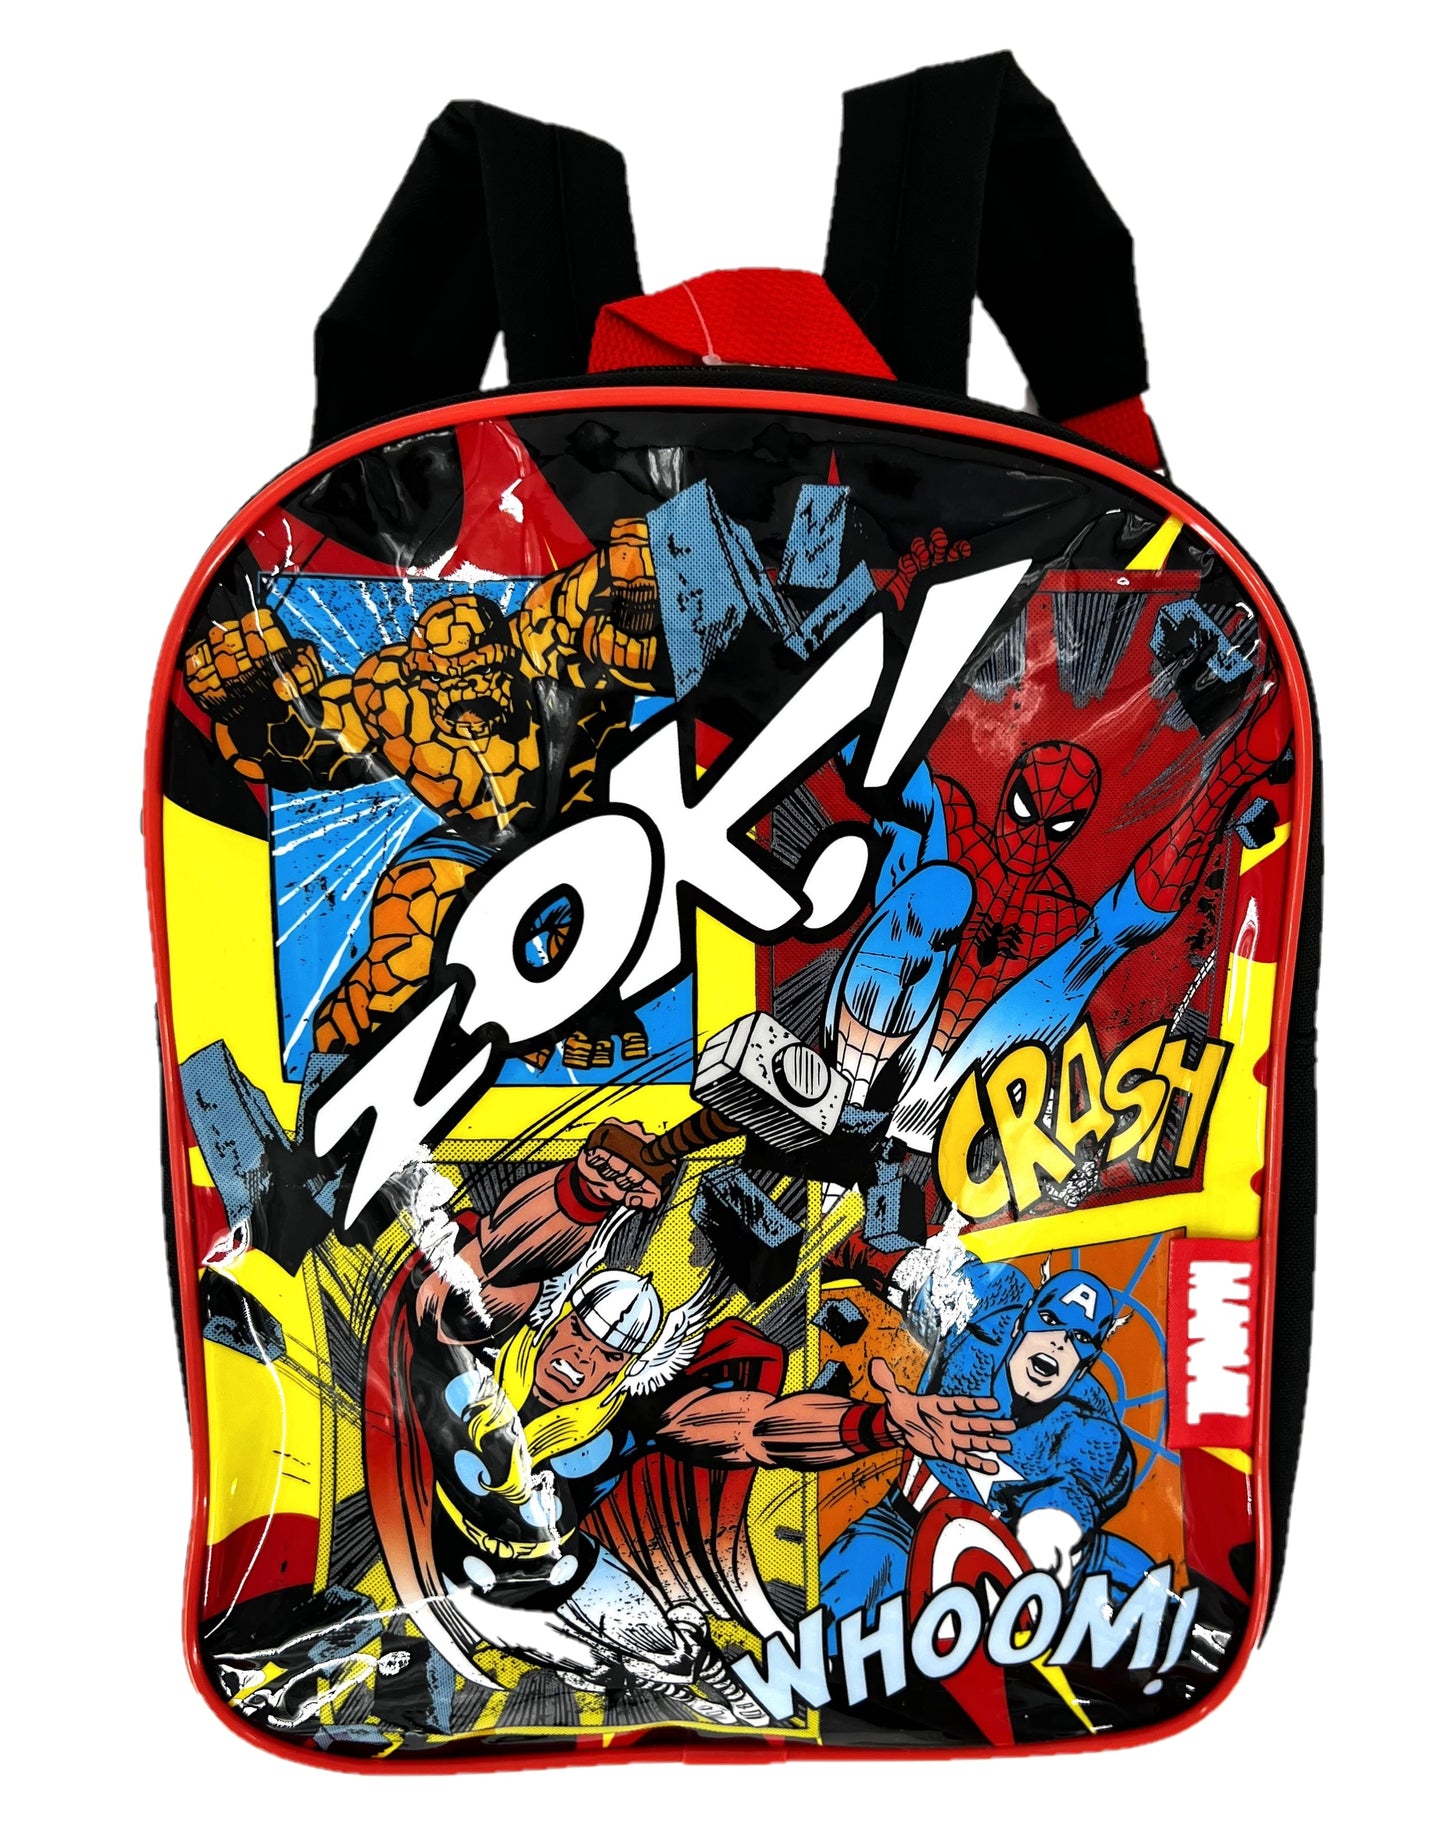 Marvel Children’s Superheroes Backpack, Ideal for School. With Spiderman, Thor